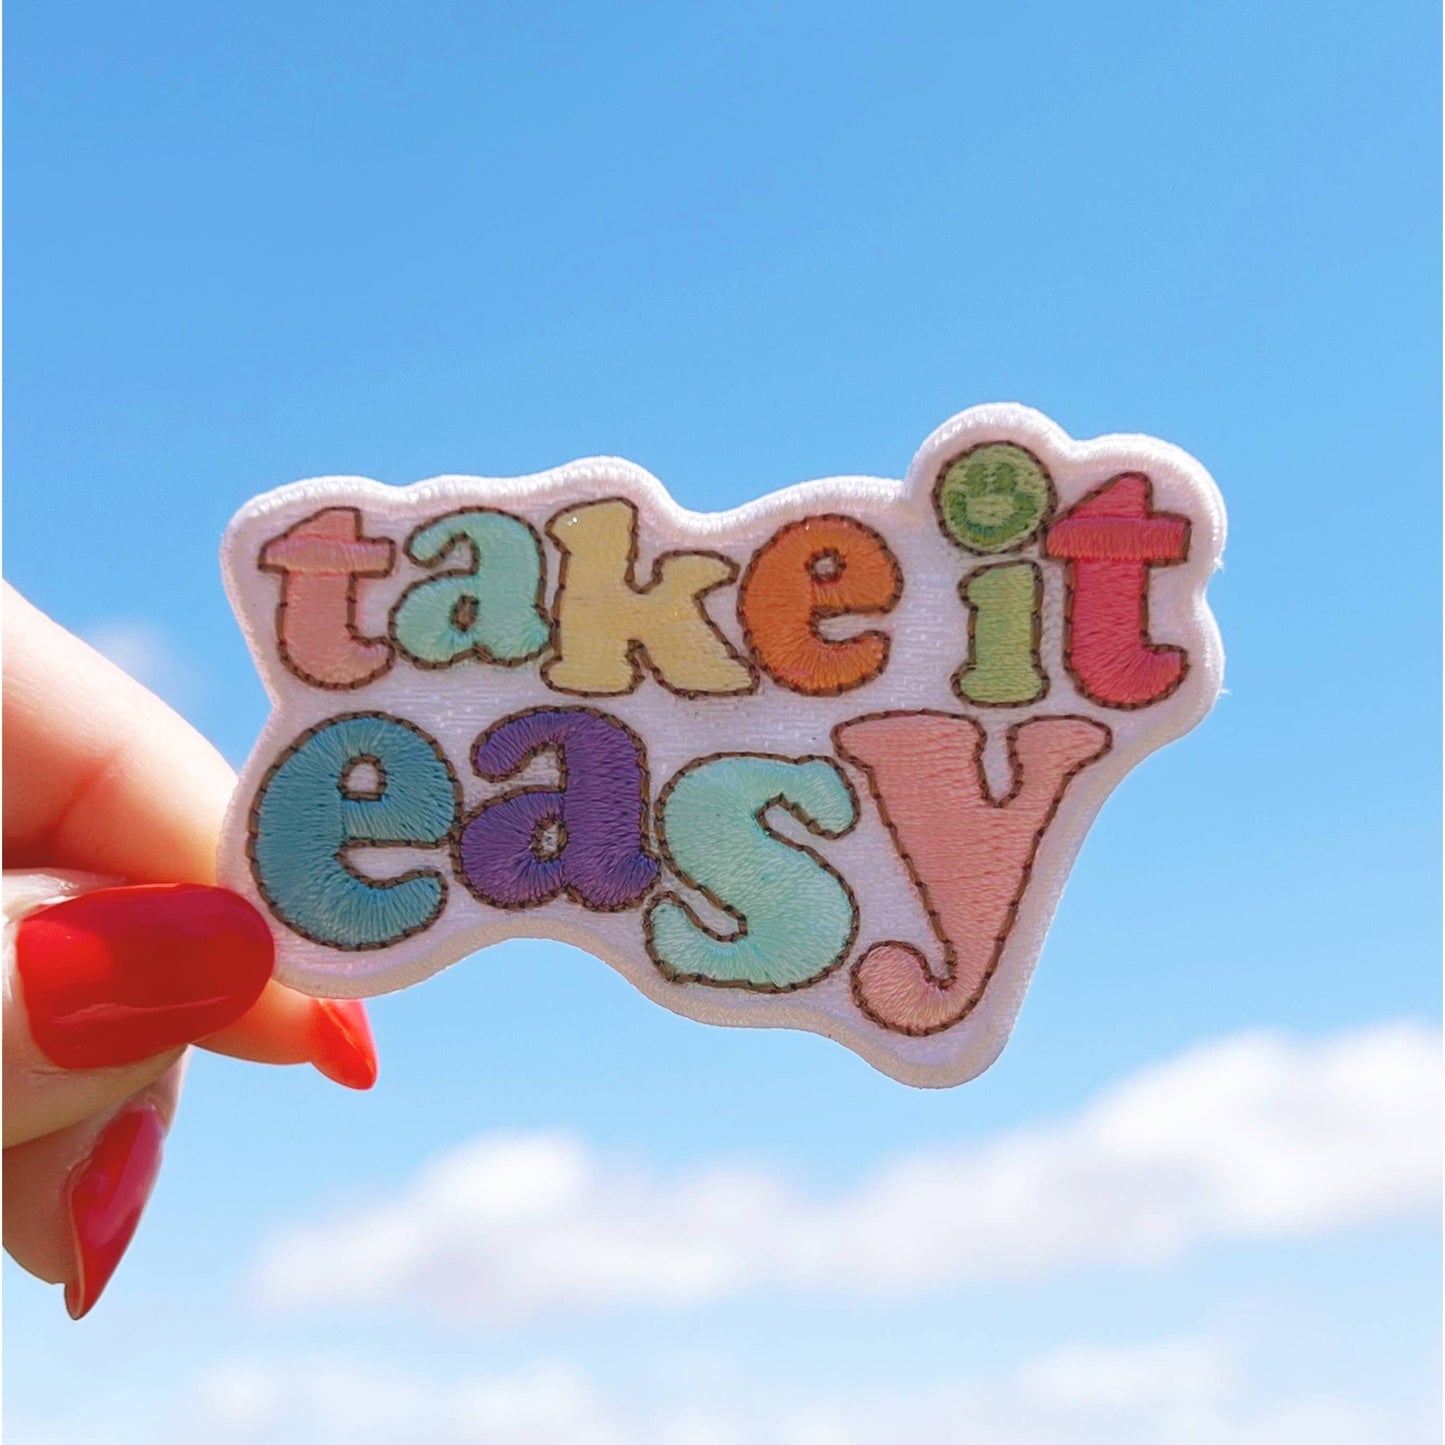 Take it Easy Patch | Colorful Embroidered Inspirational Quote Applique